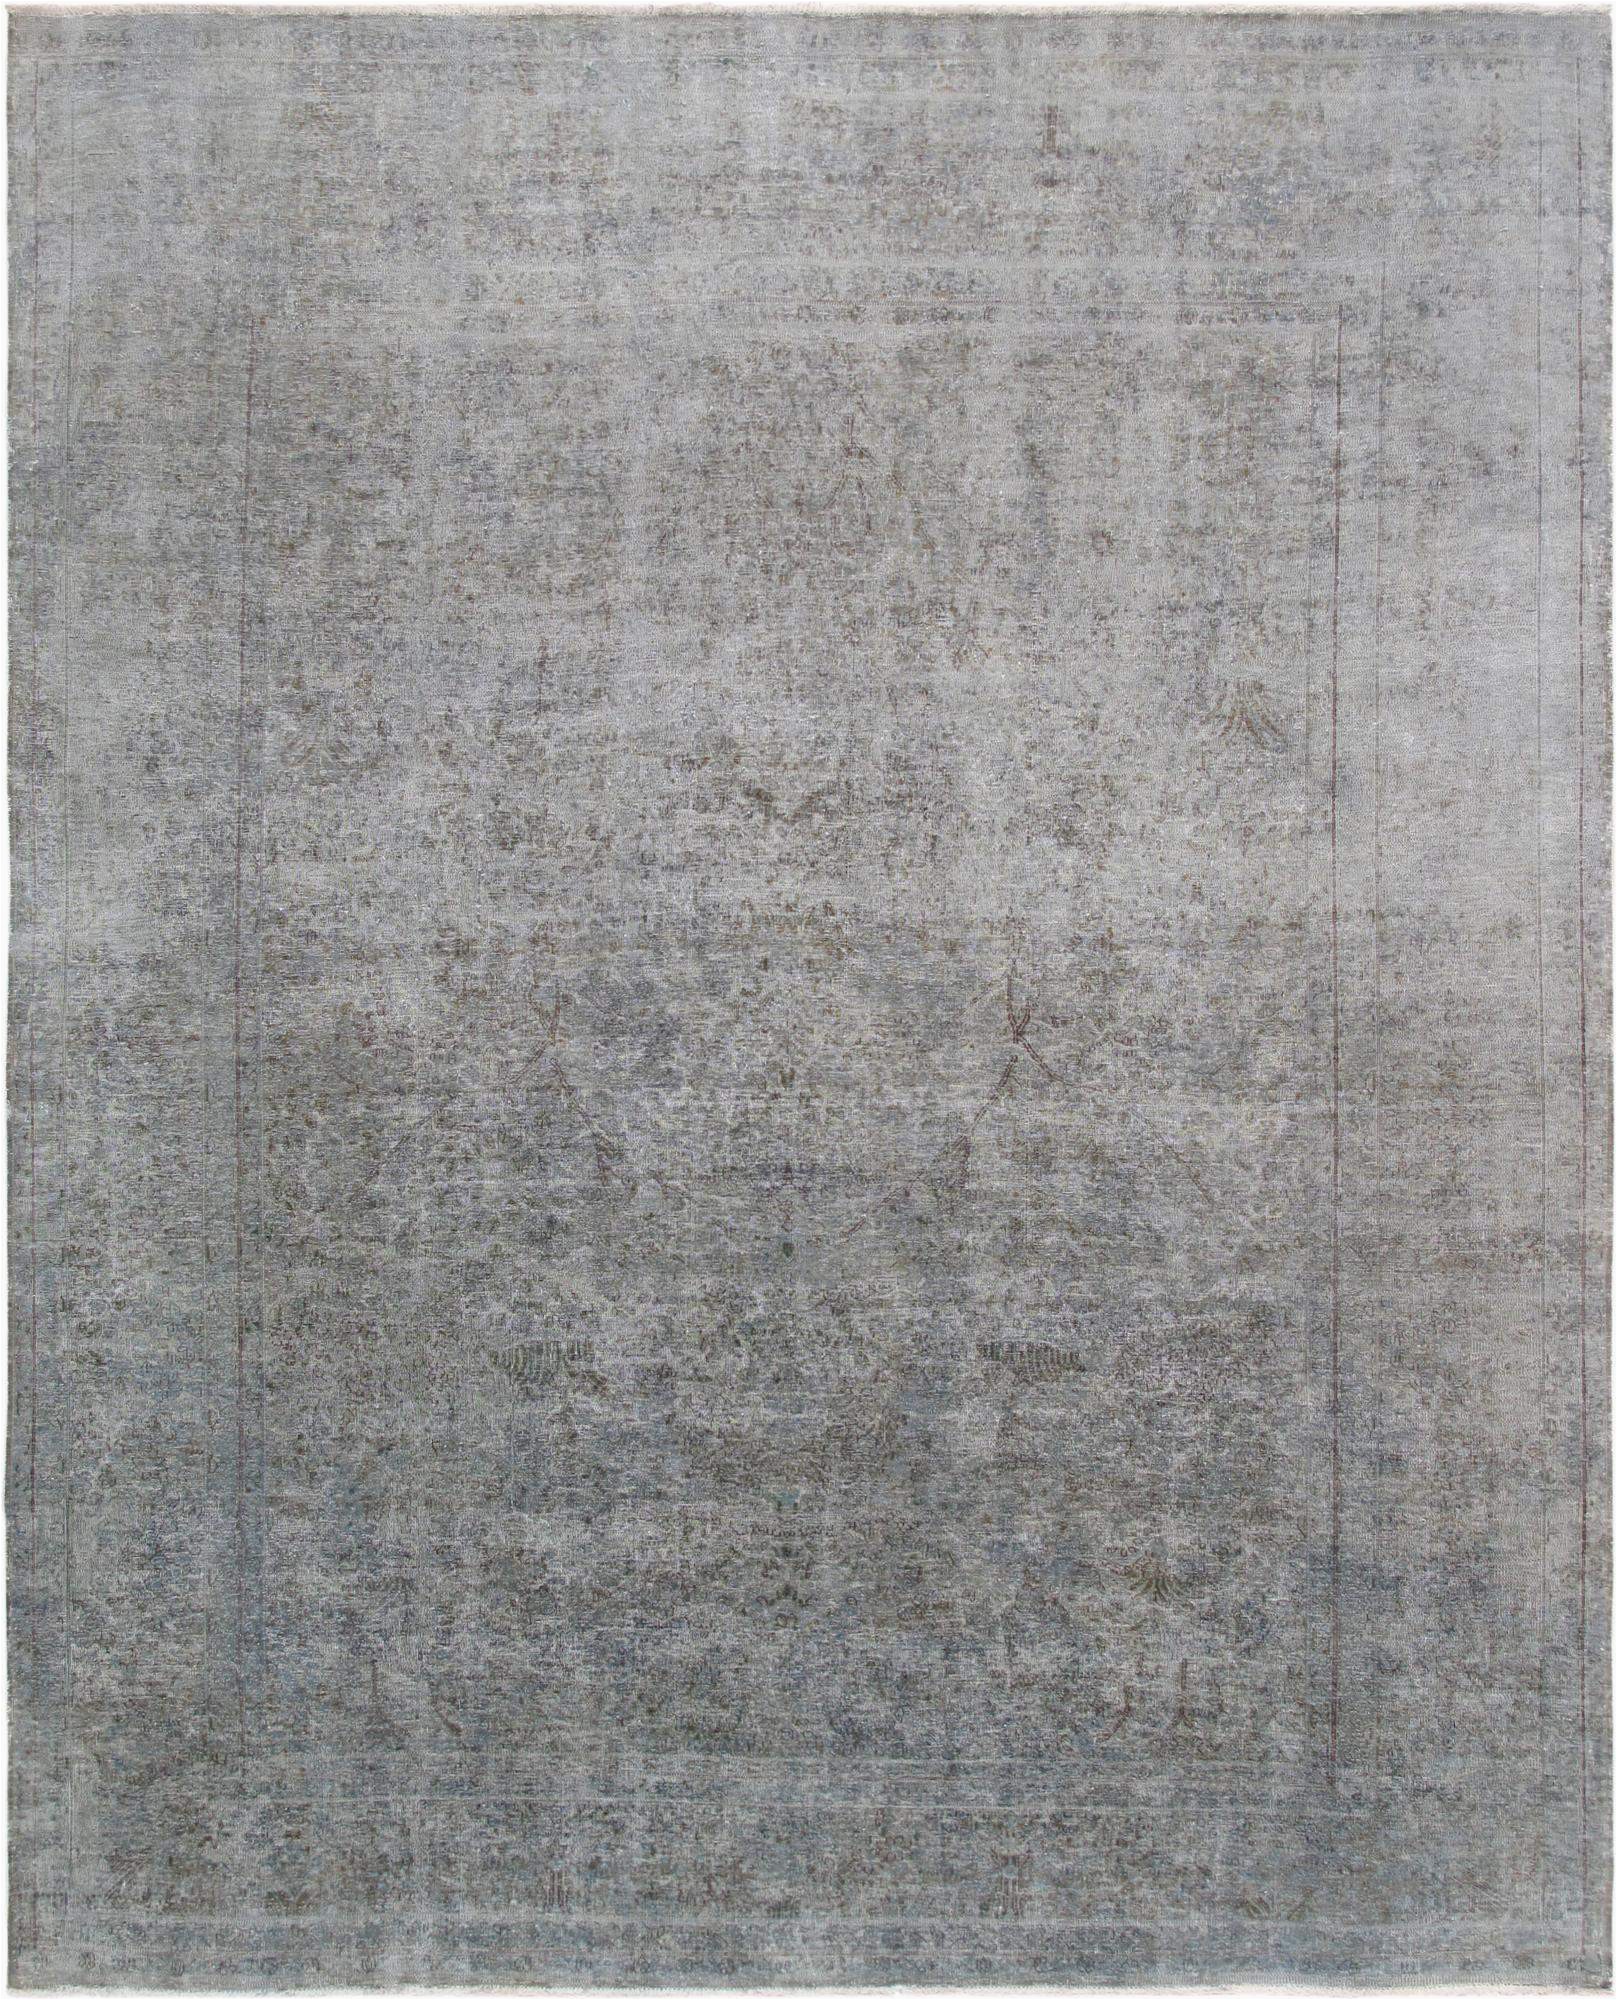 7 by 12 area Rug 9 X 12 Overdyed Grey Wool area Rug